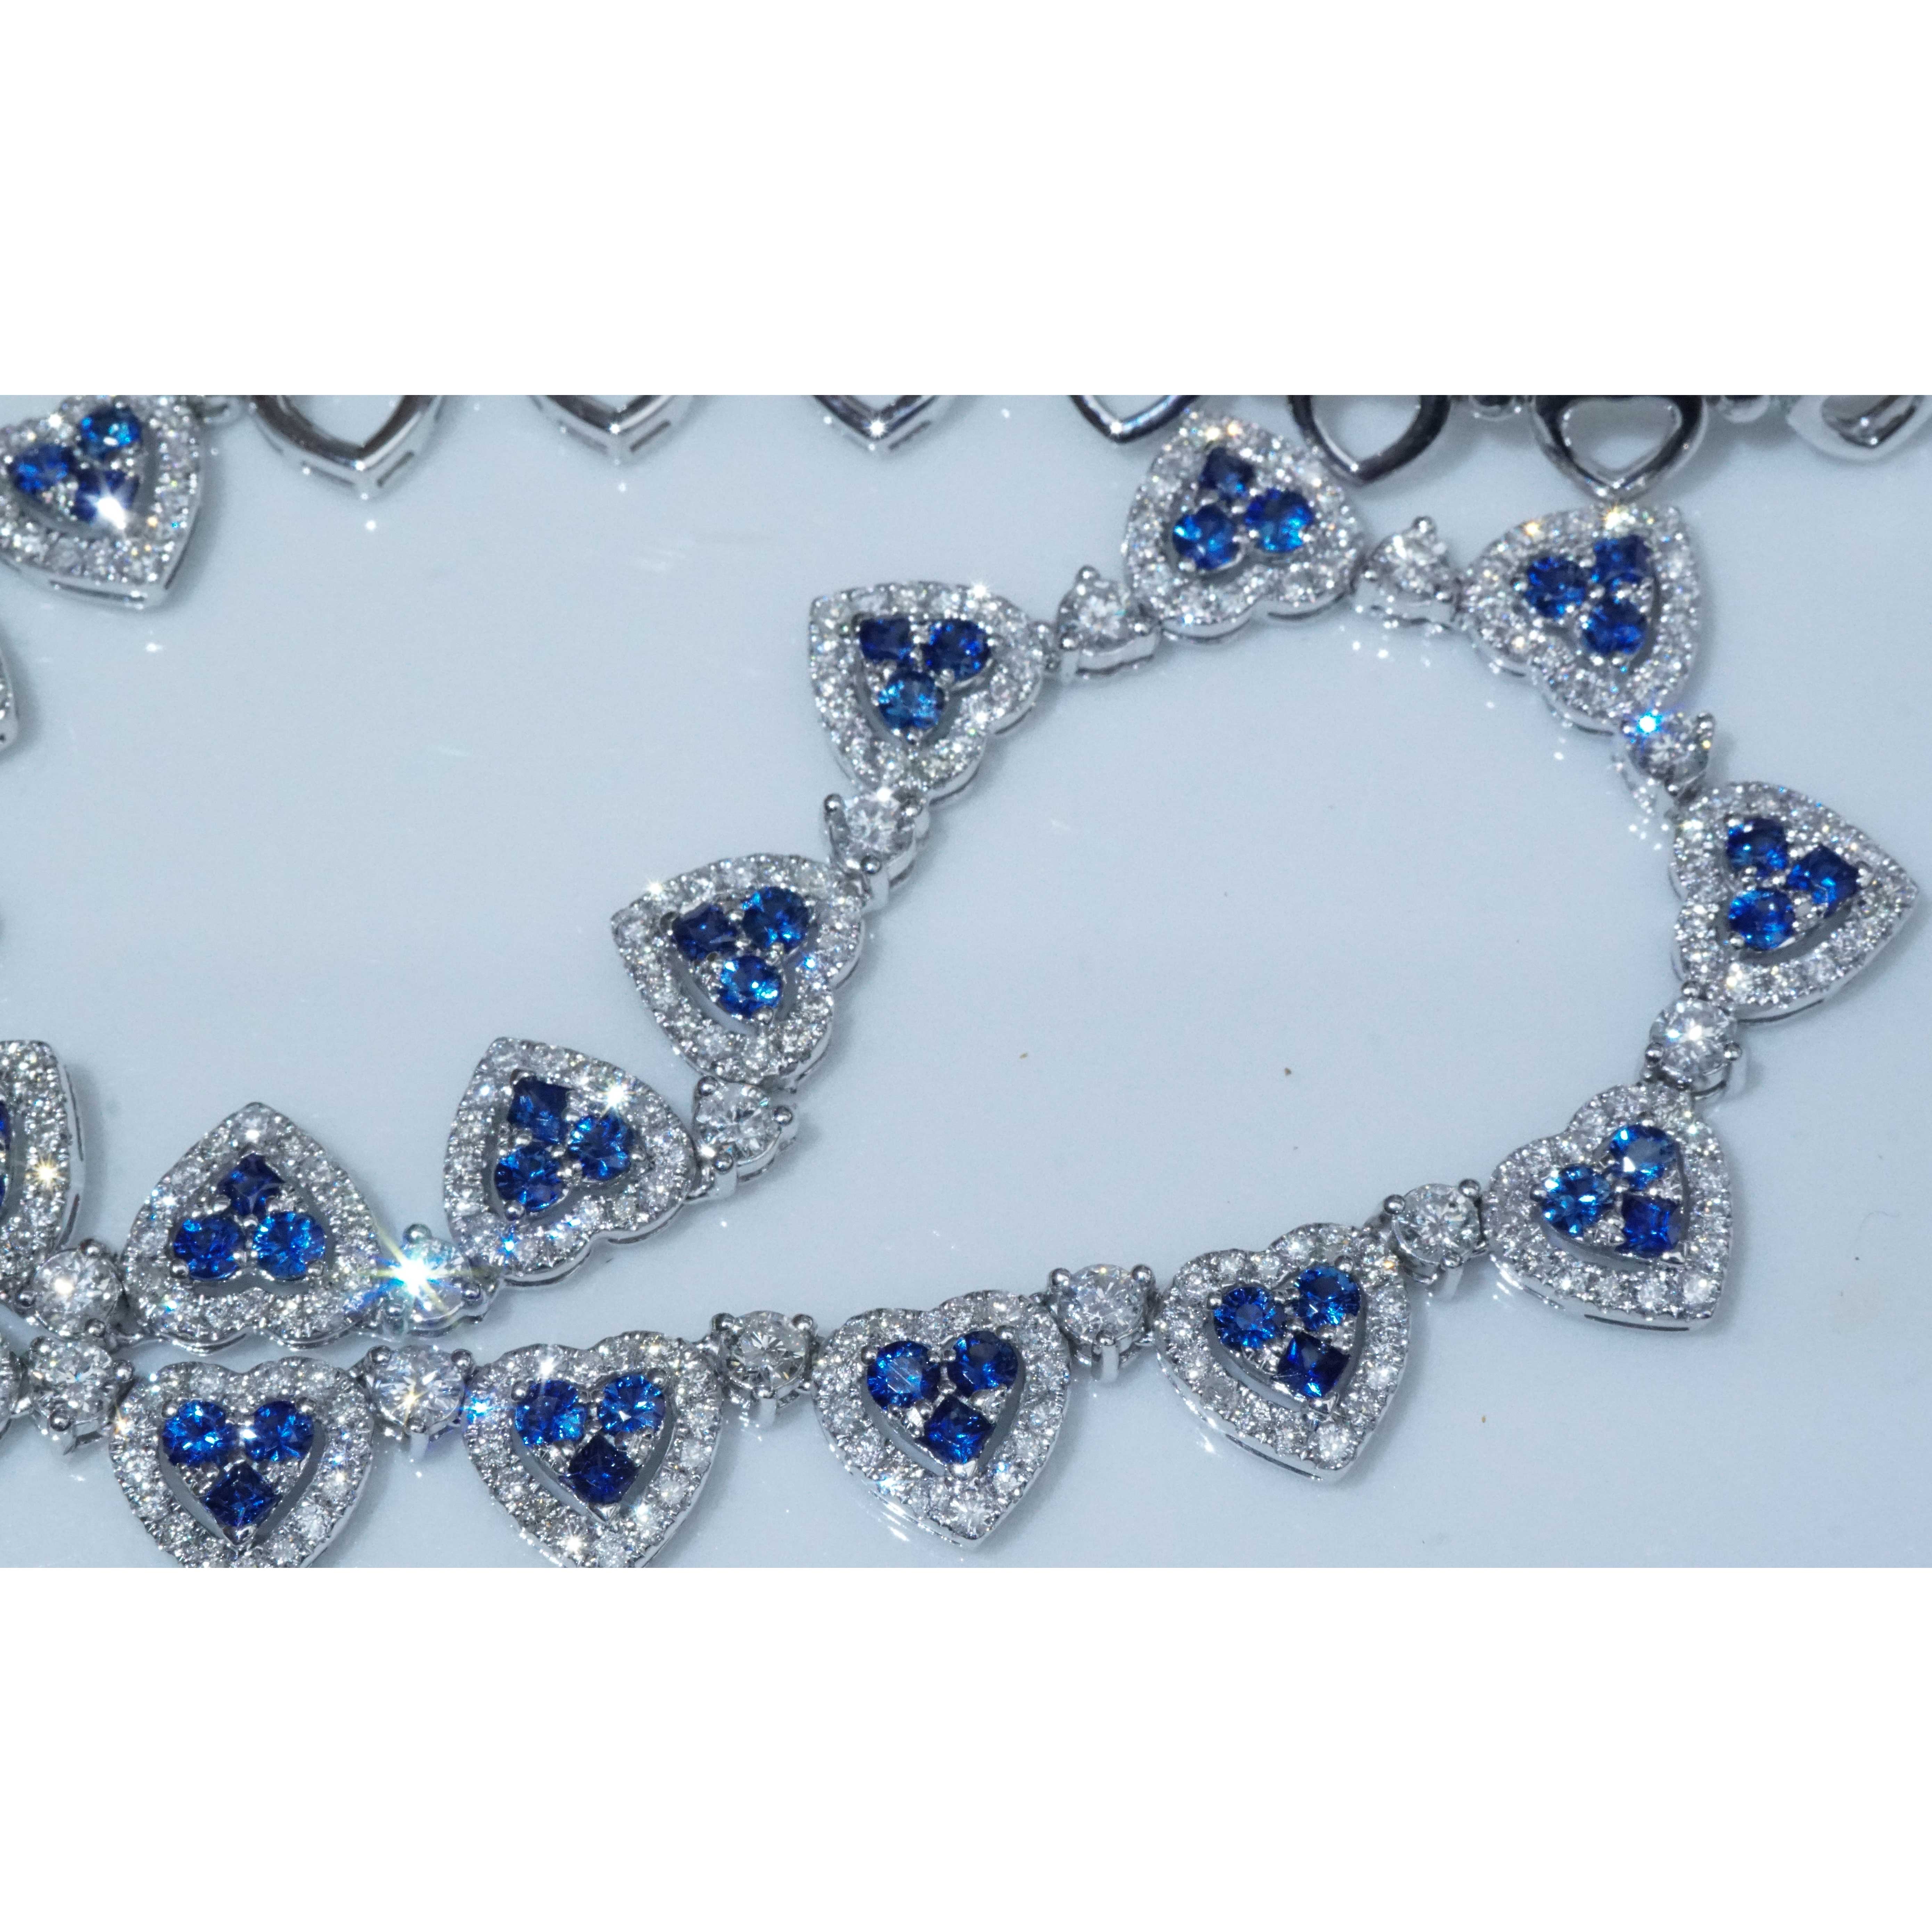 immortalized love of the heart fully movable brilliant sapphire necklace consisting of 19 heart elements set with 322 full-cut brilliant-cut diamonds totaling approx. 4.40 ct, W (white) / SI1-2 (very small inclusions) and 57 fine sapphires totaling